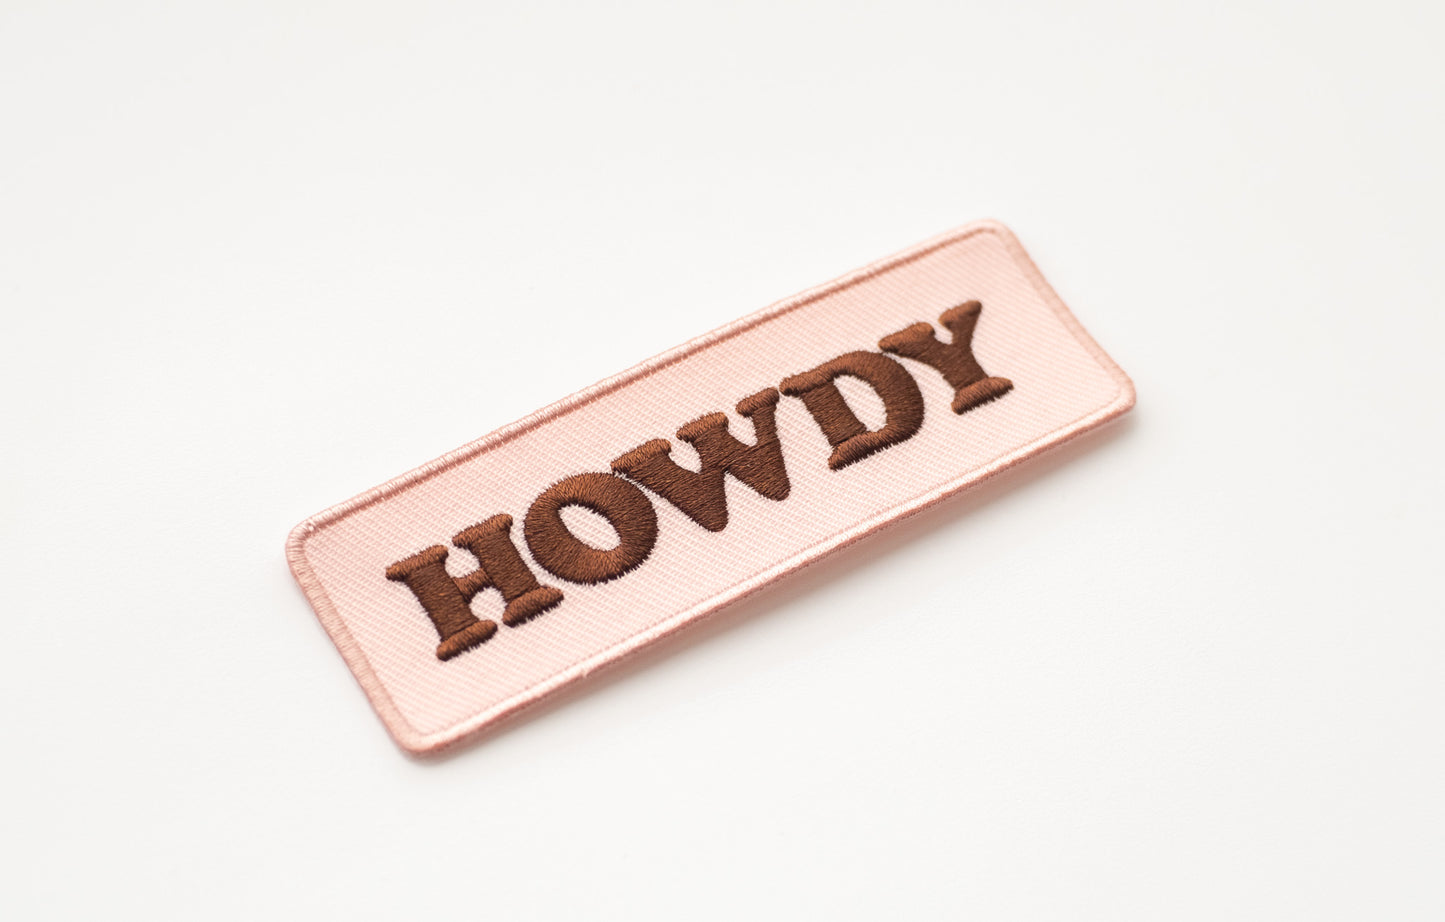 Howdy Iron On Patch